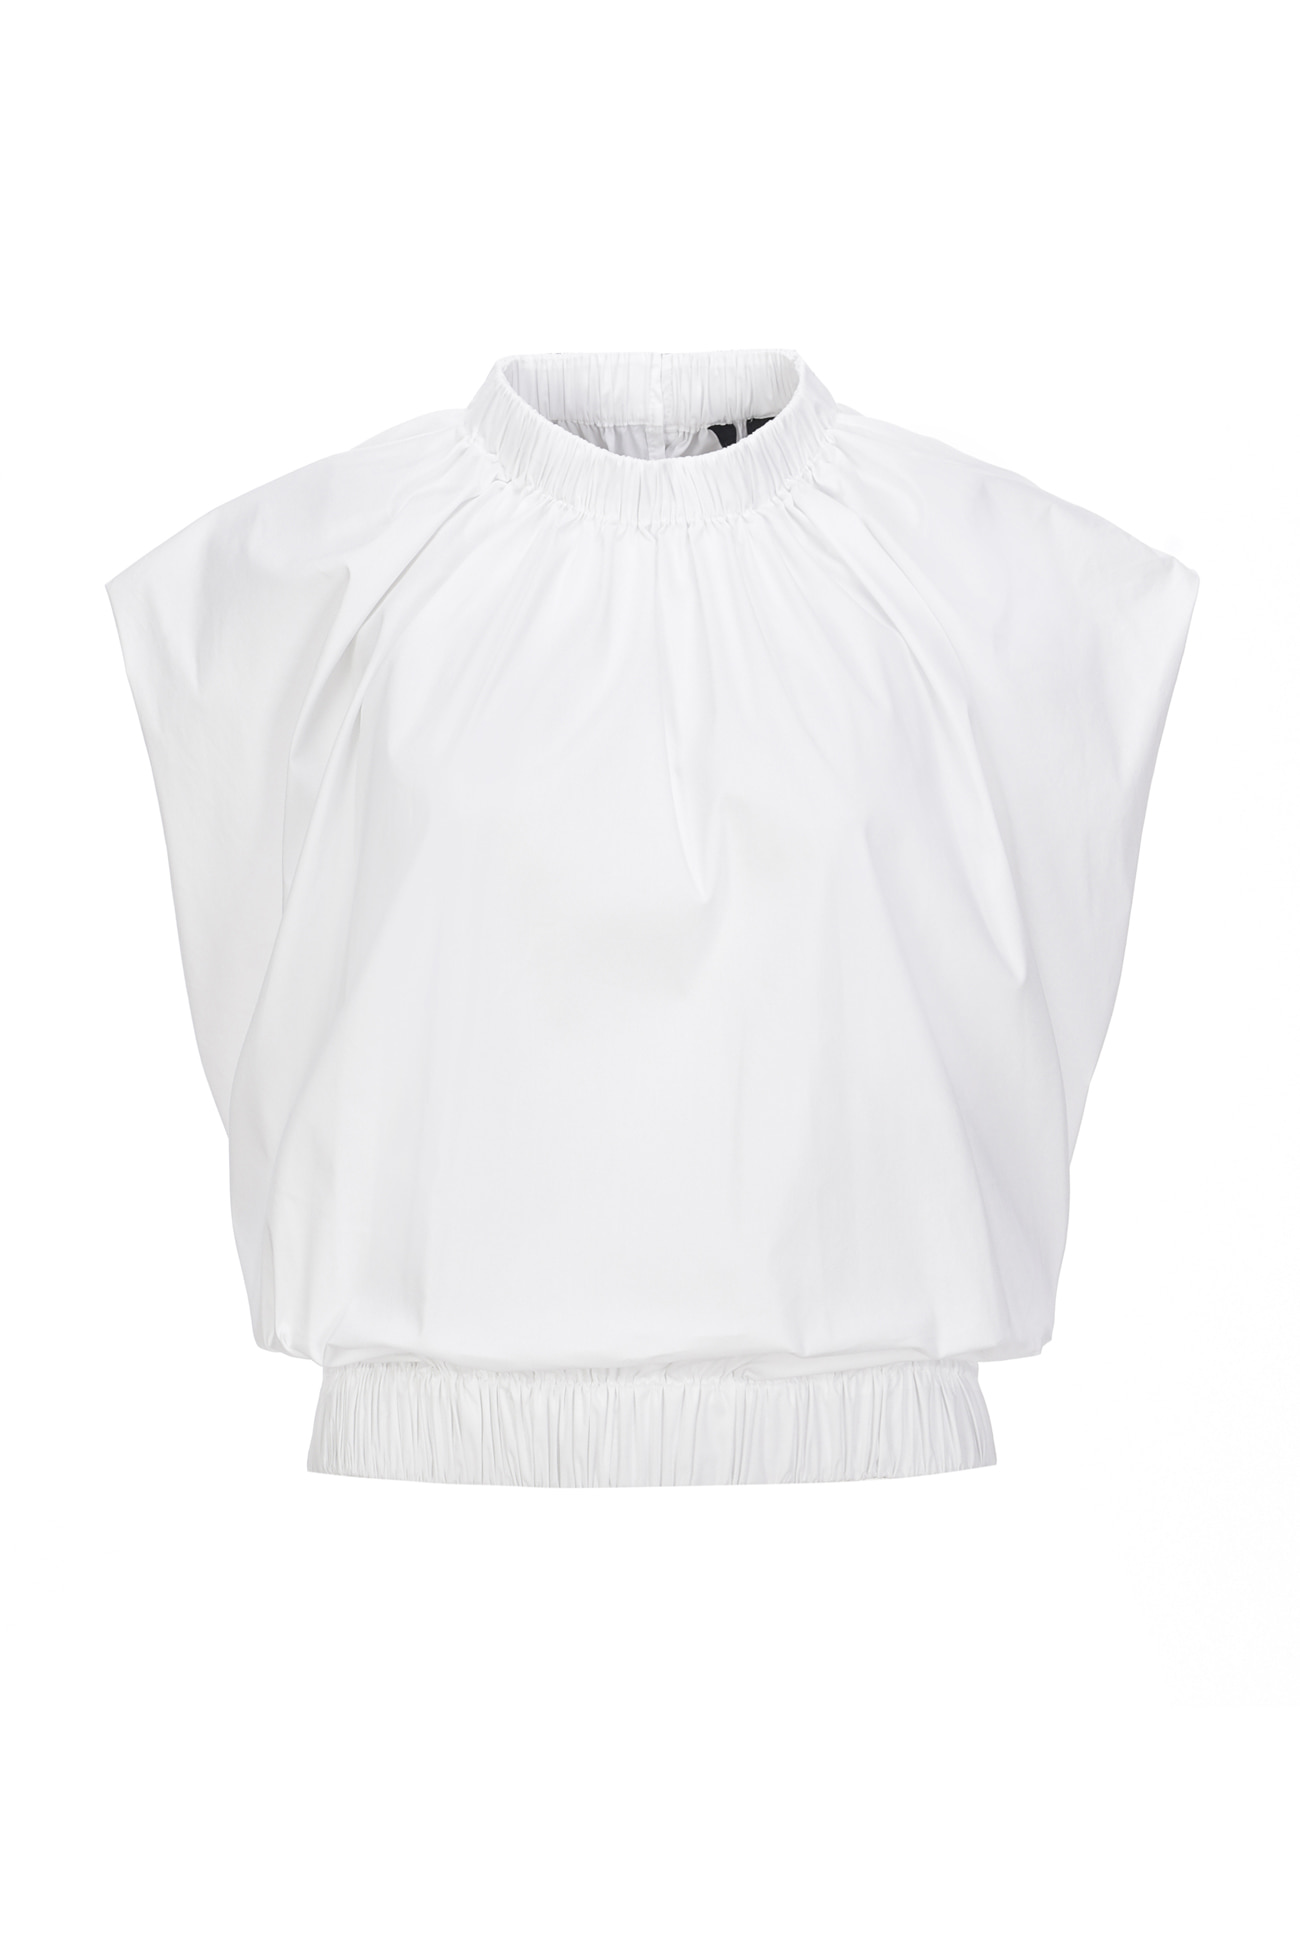 HIGH QUALITY LINE - High-Neck Crepe Blouse (White)